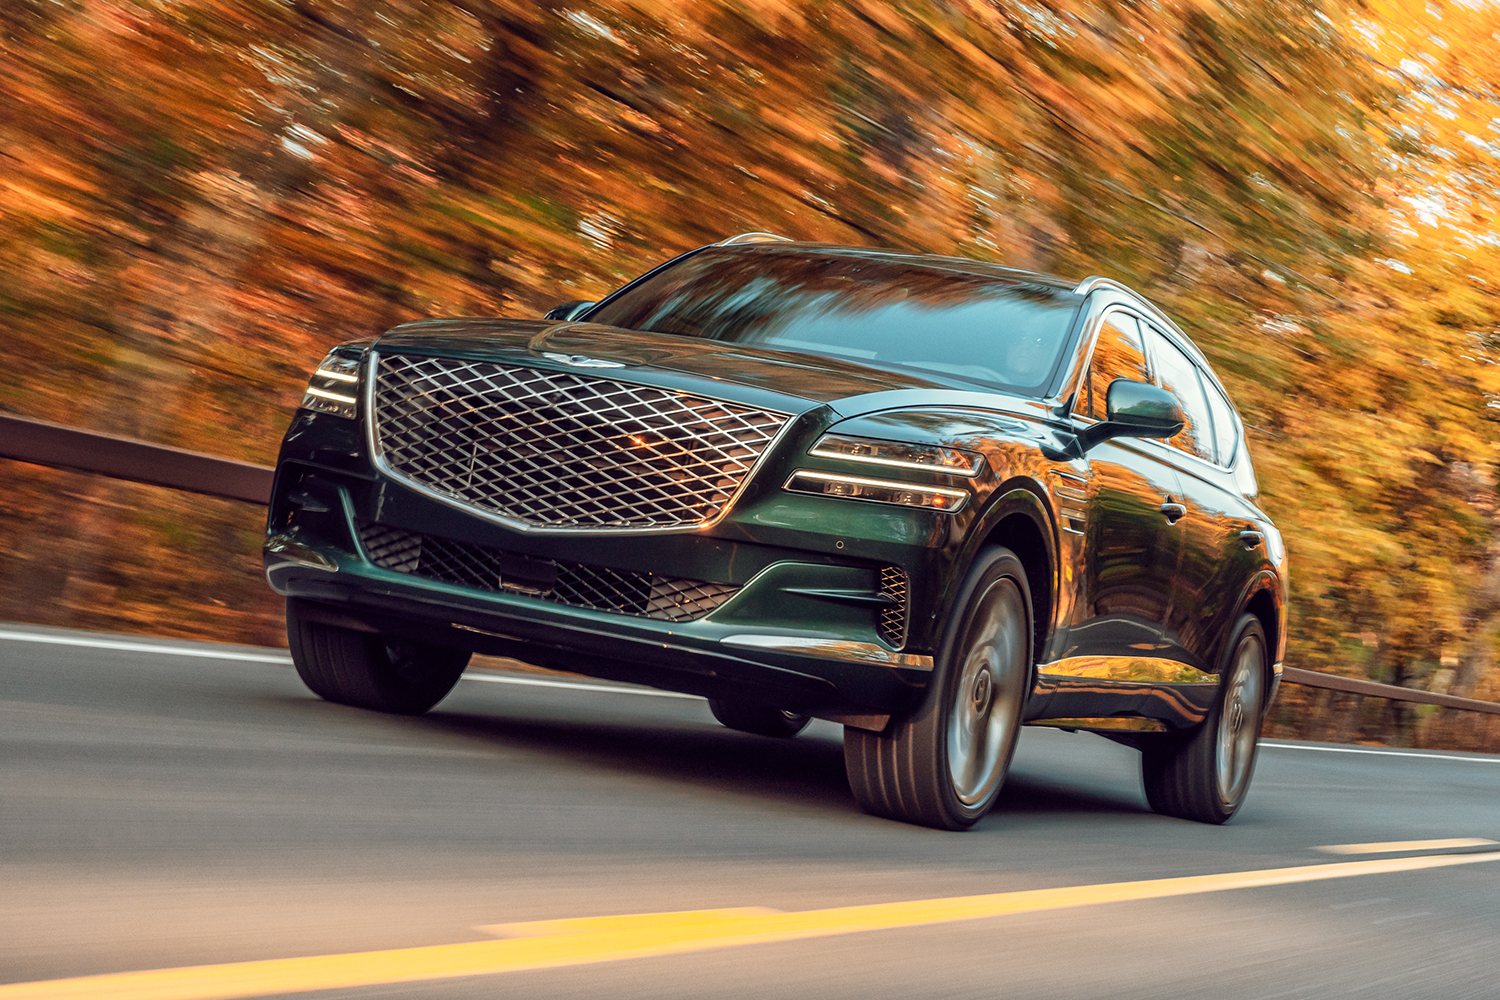 The 2021 Genesis GV80 SUV driving past trees with fall foliage